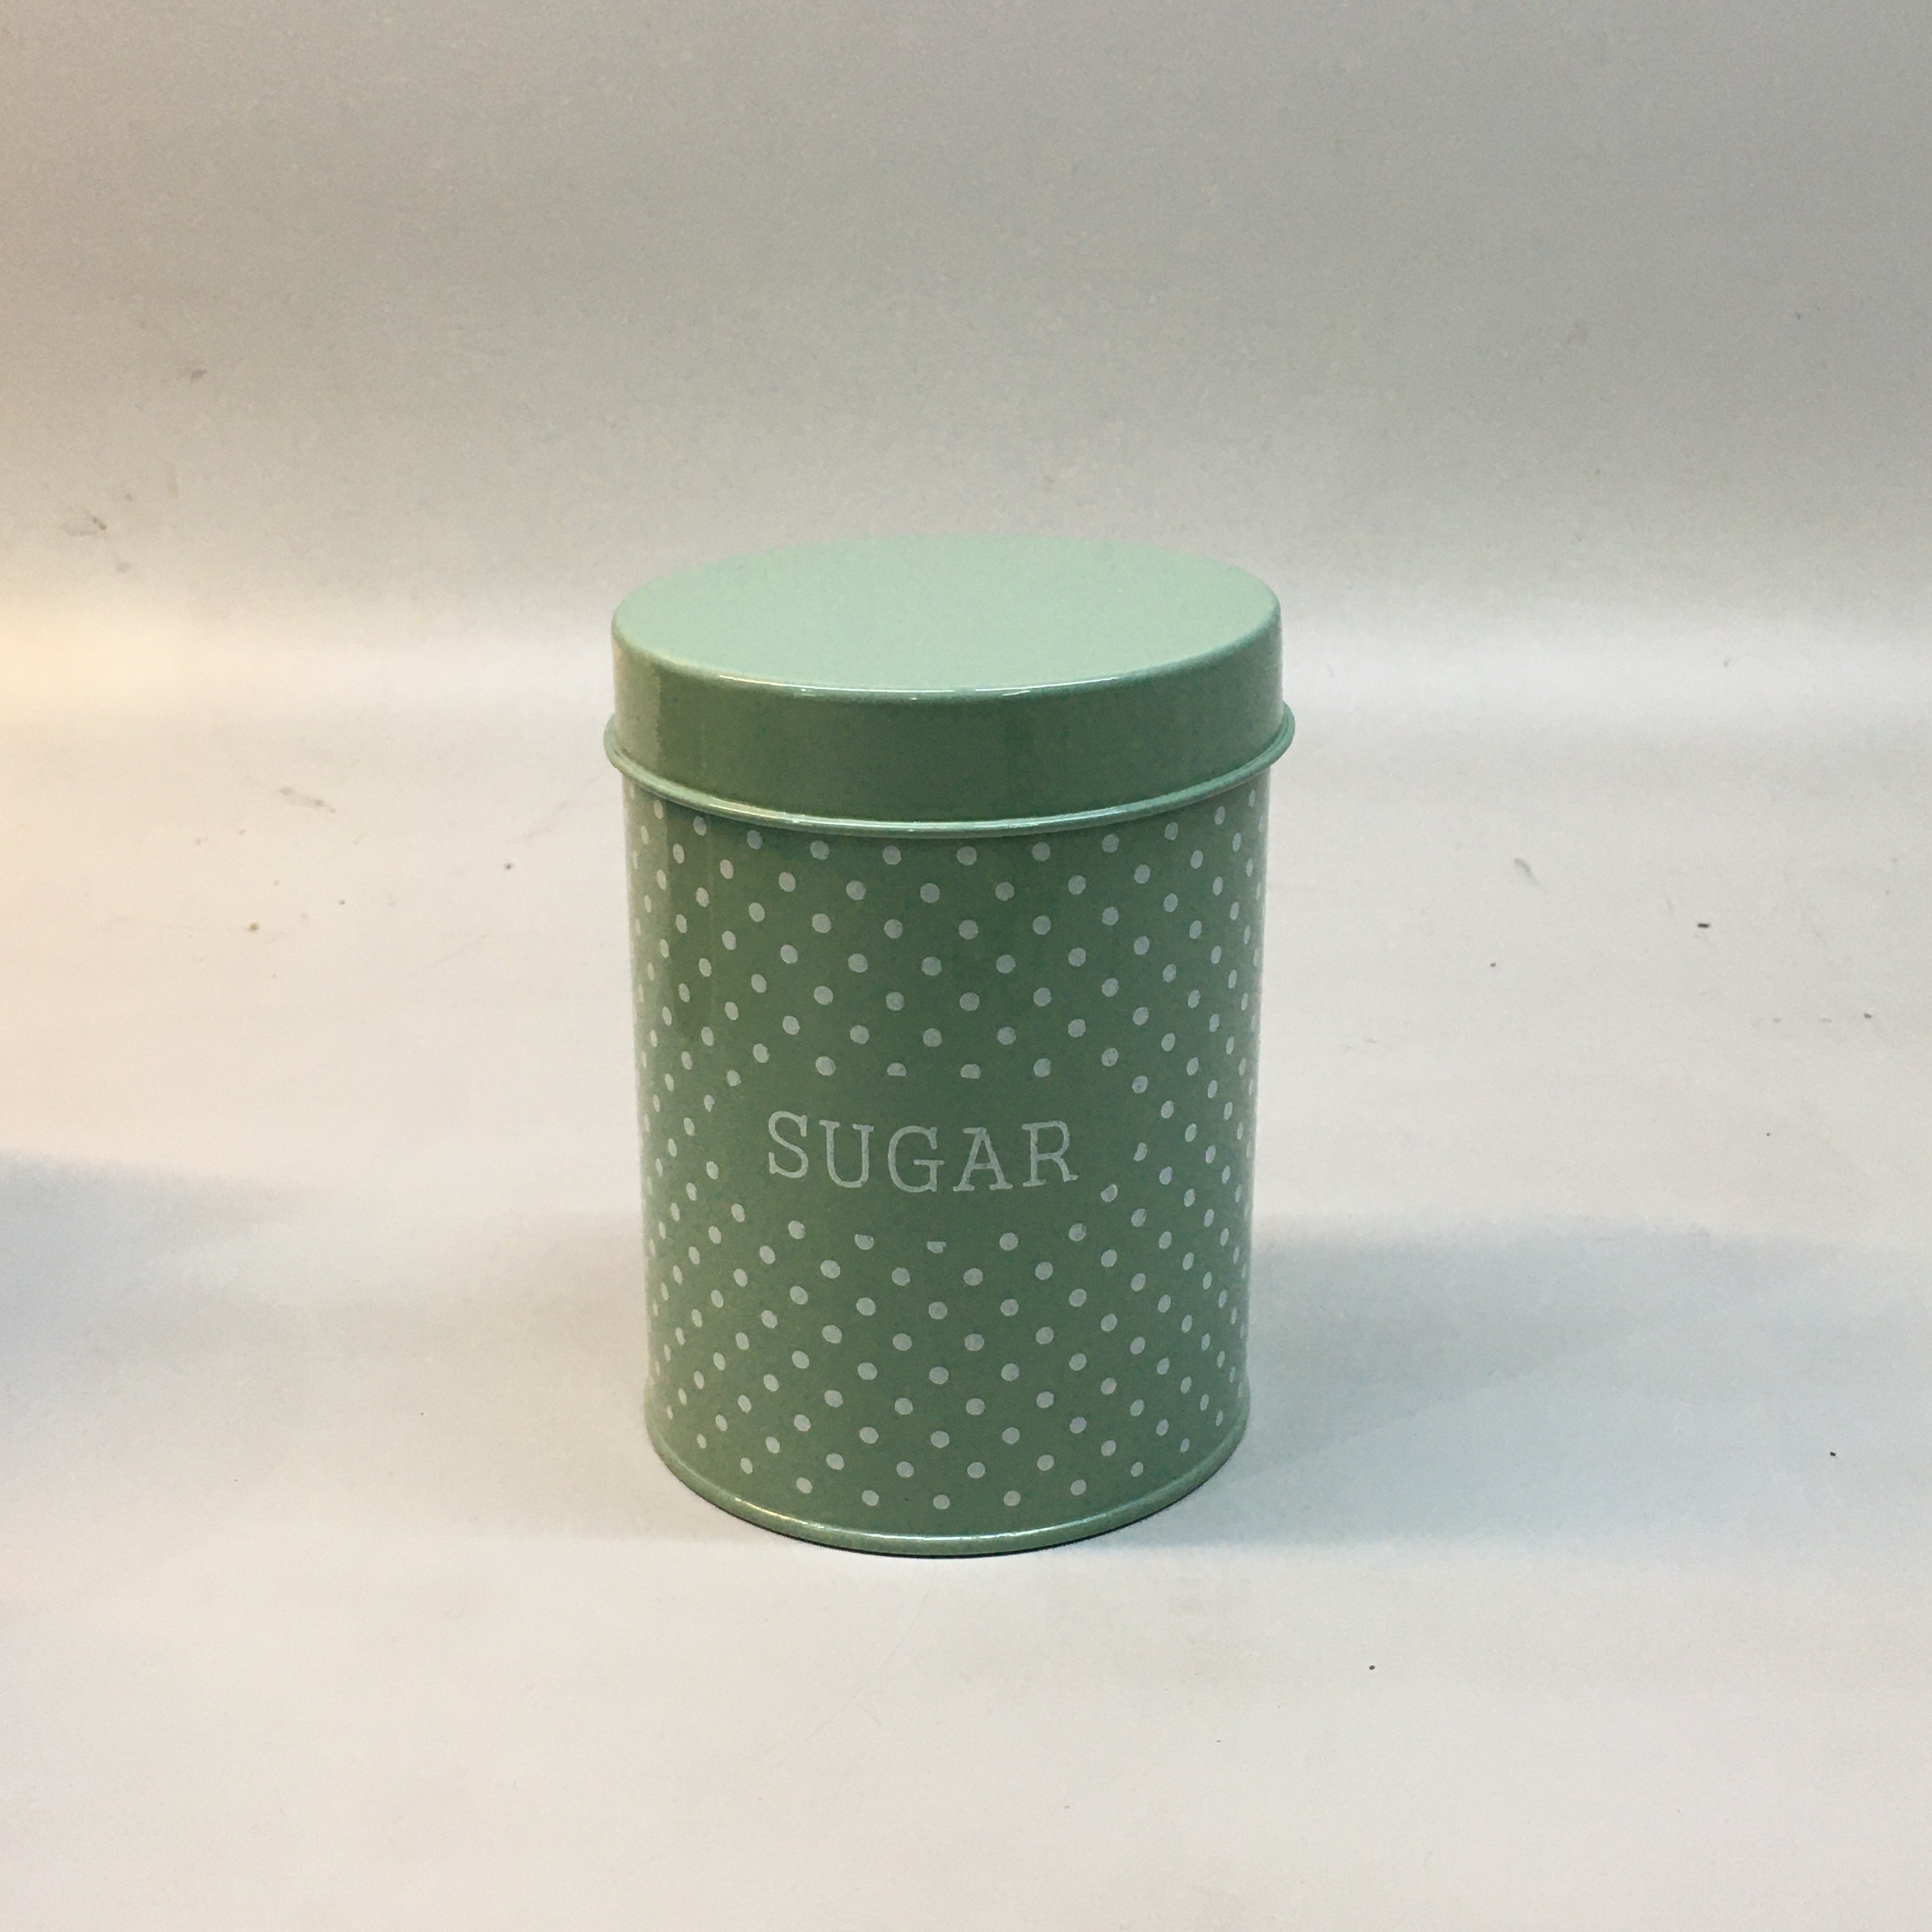 Vintage Tin Biscuit Canister Green & White Polka Dot 12x15cm